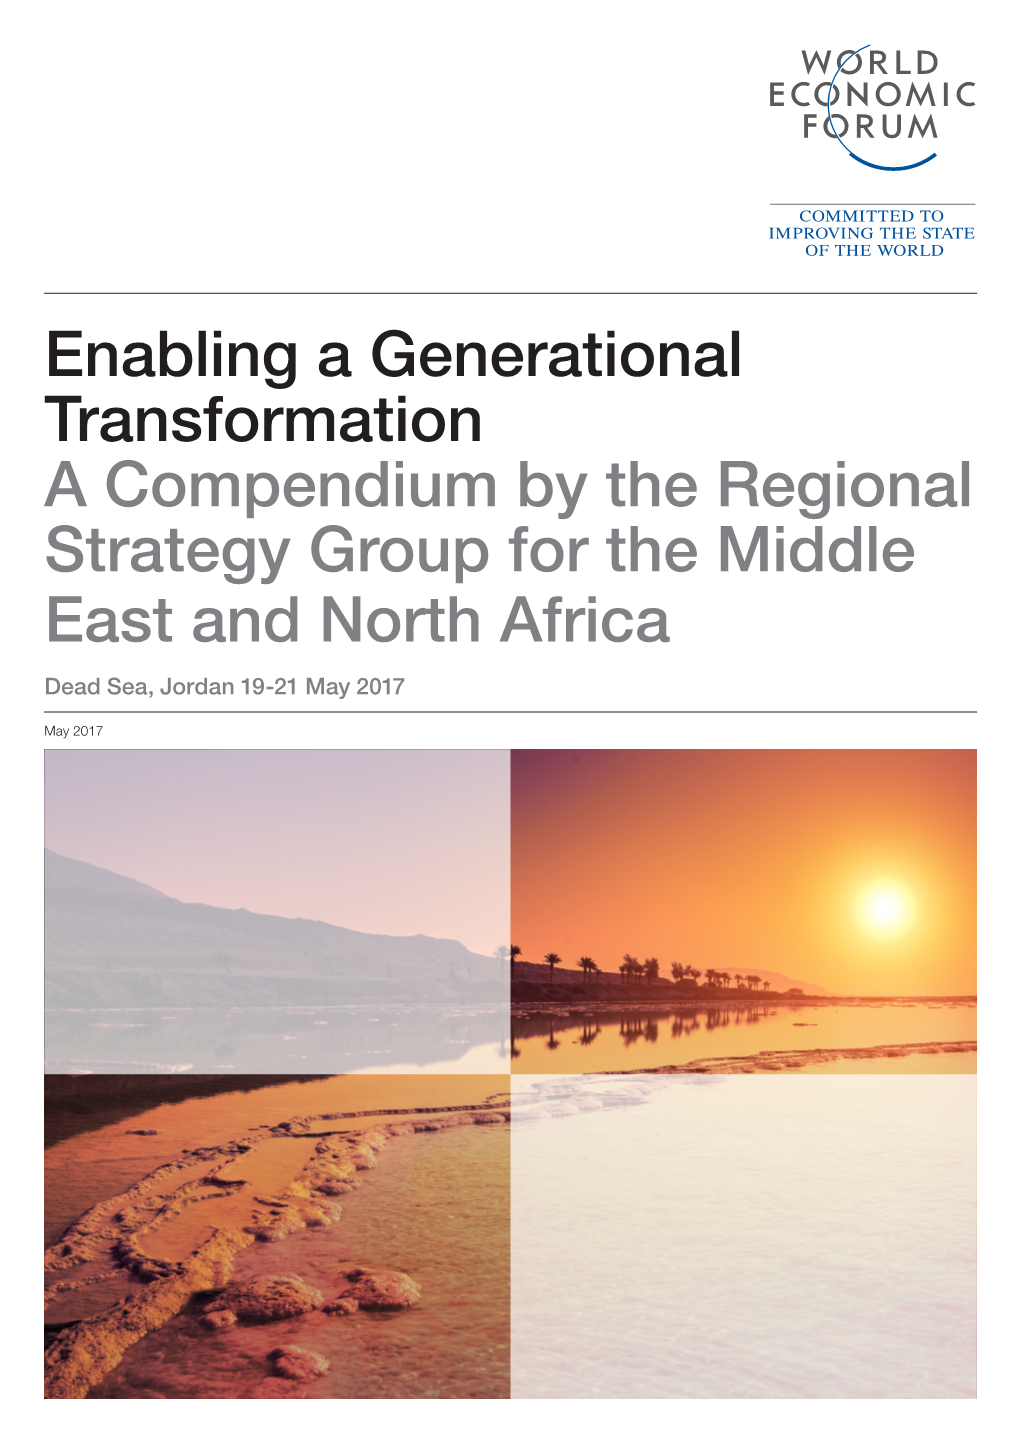 Enabling a Generational Transformation a Compendium by the Regional Strategy Group for the Middle East and North Africa Dead Sea, Jordan 19-21 May 2017